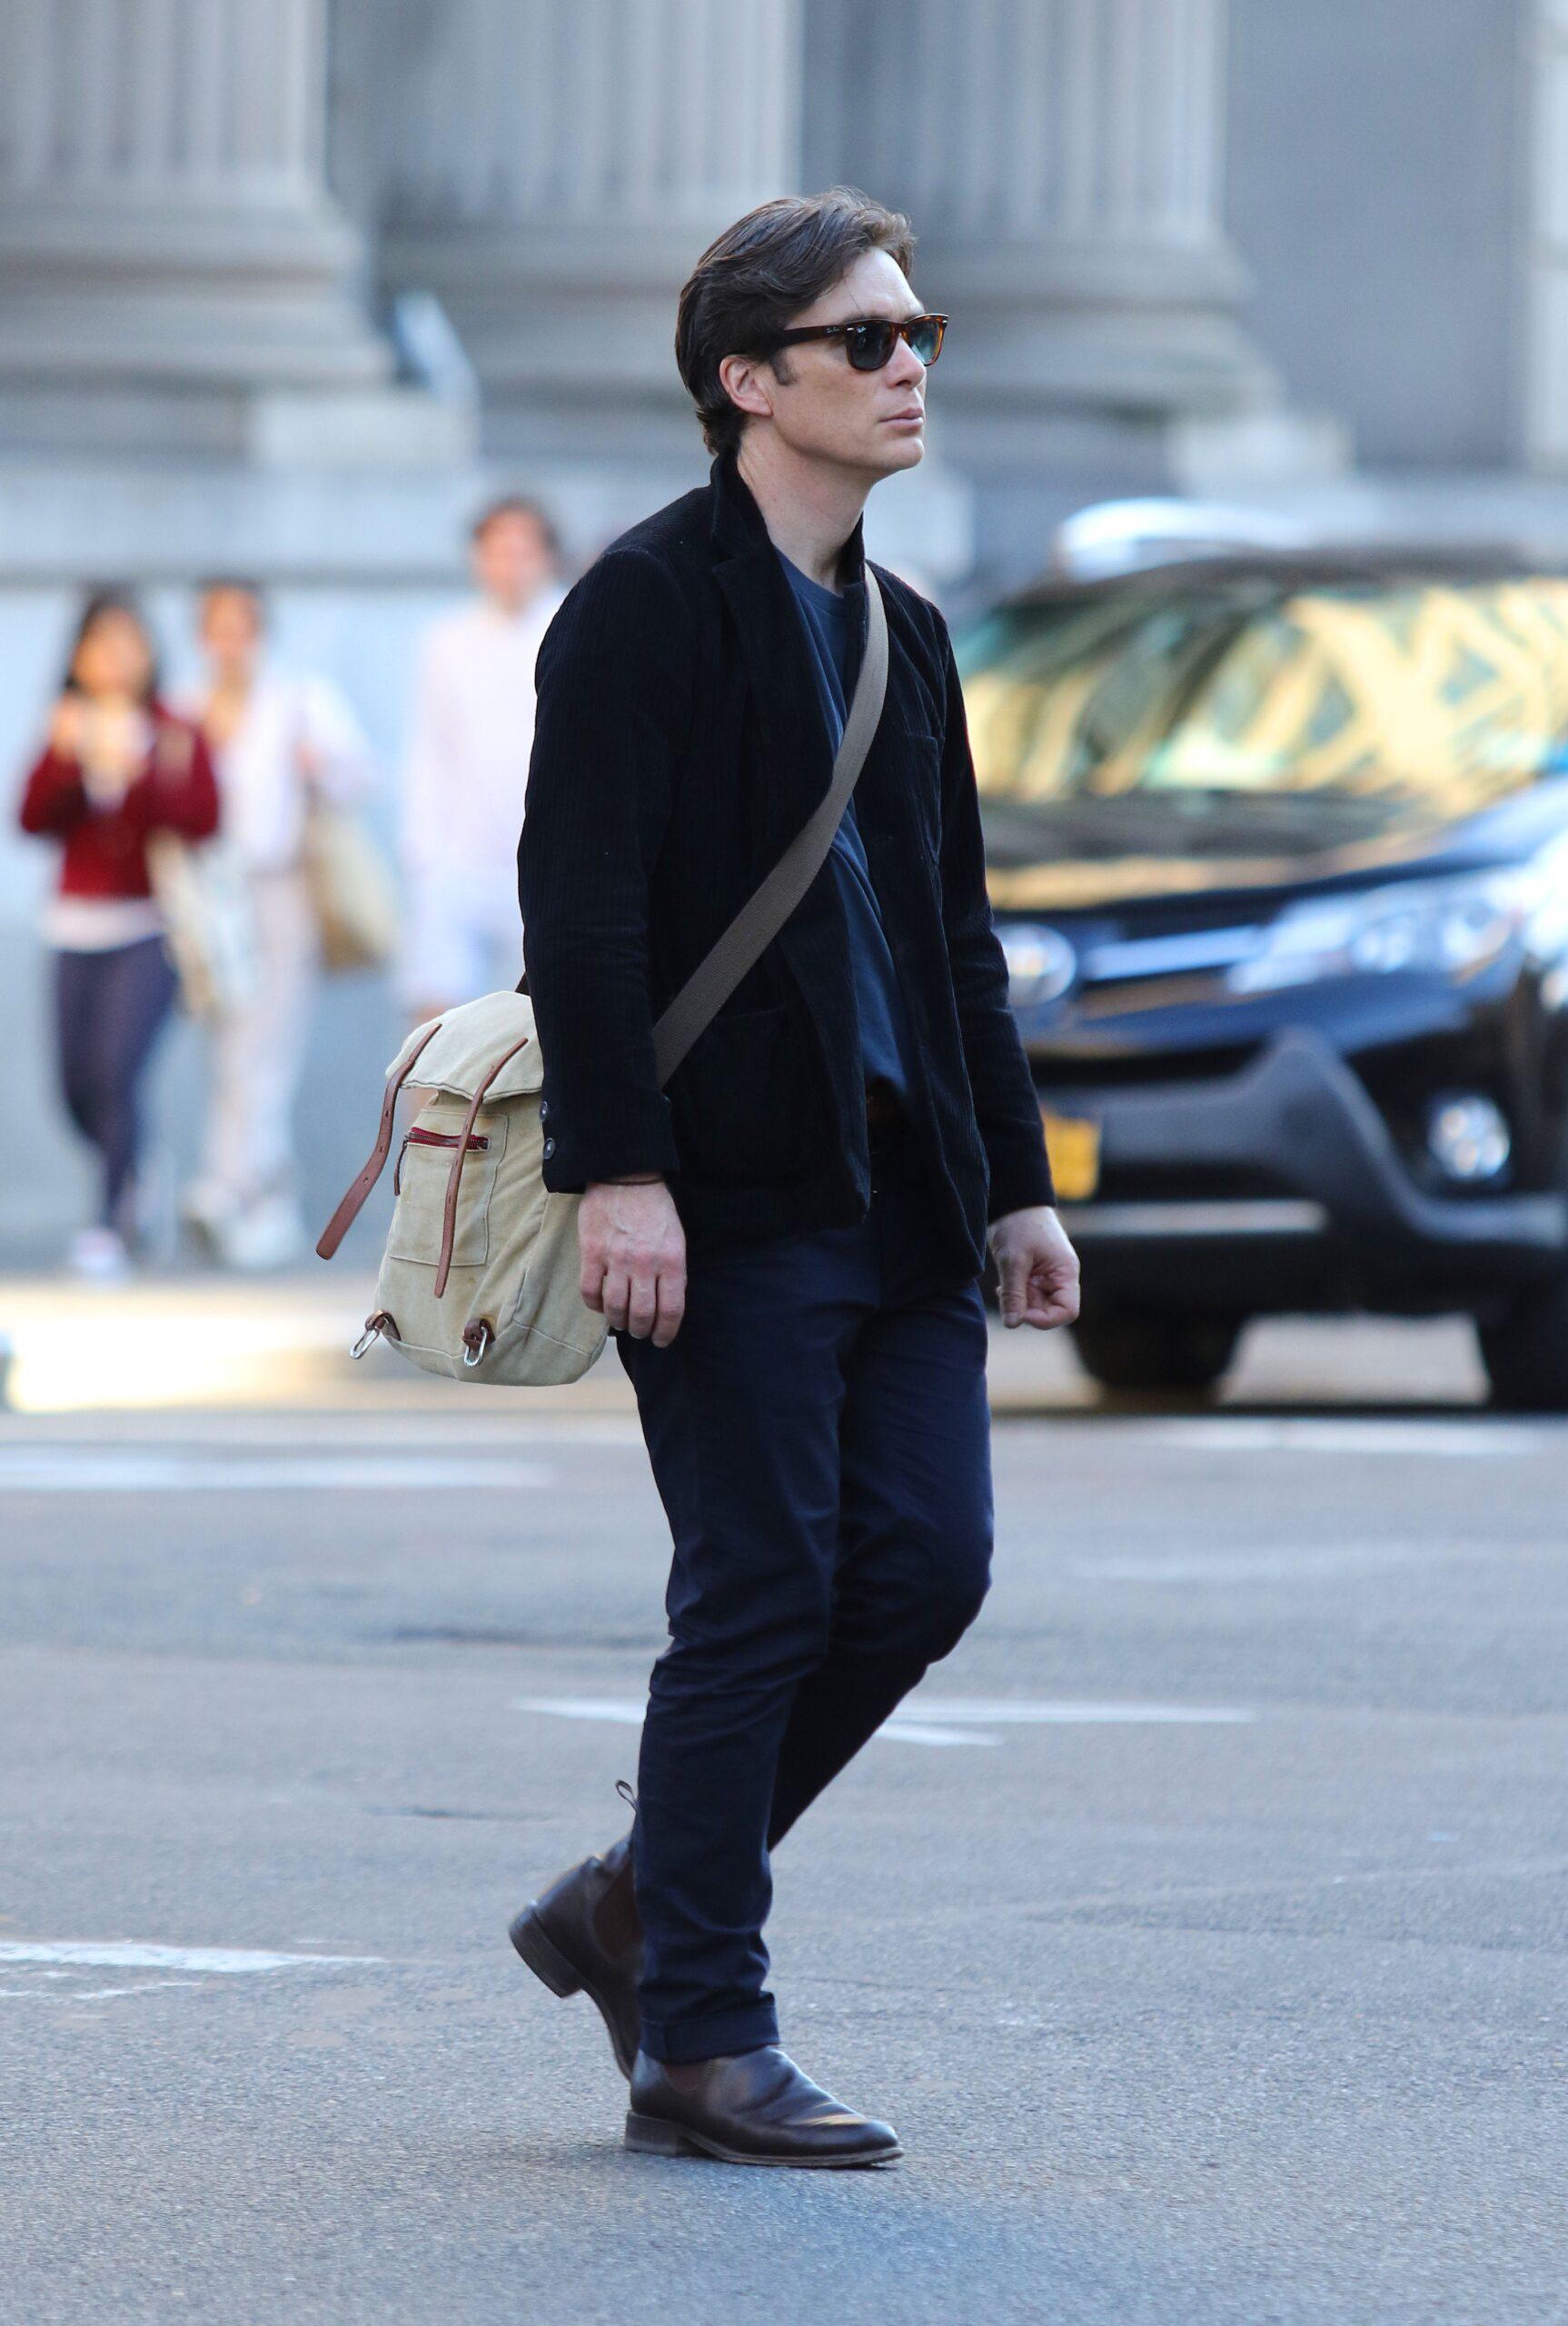 Cillian Murphy goes shopping for Jeans in NYC